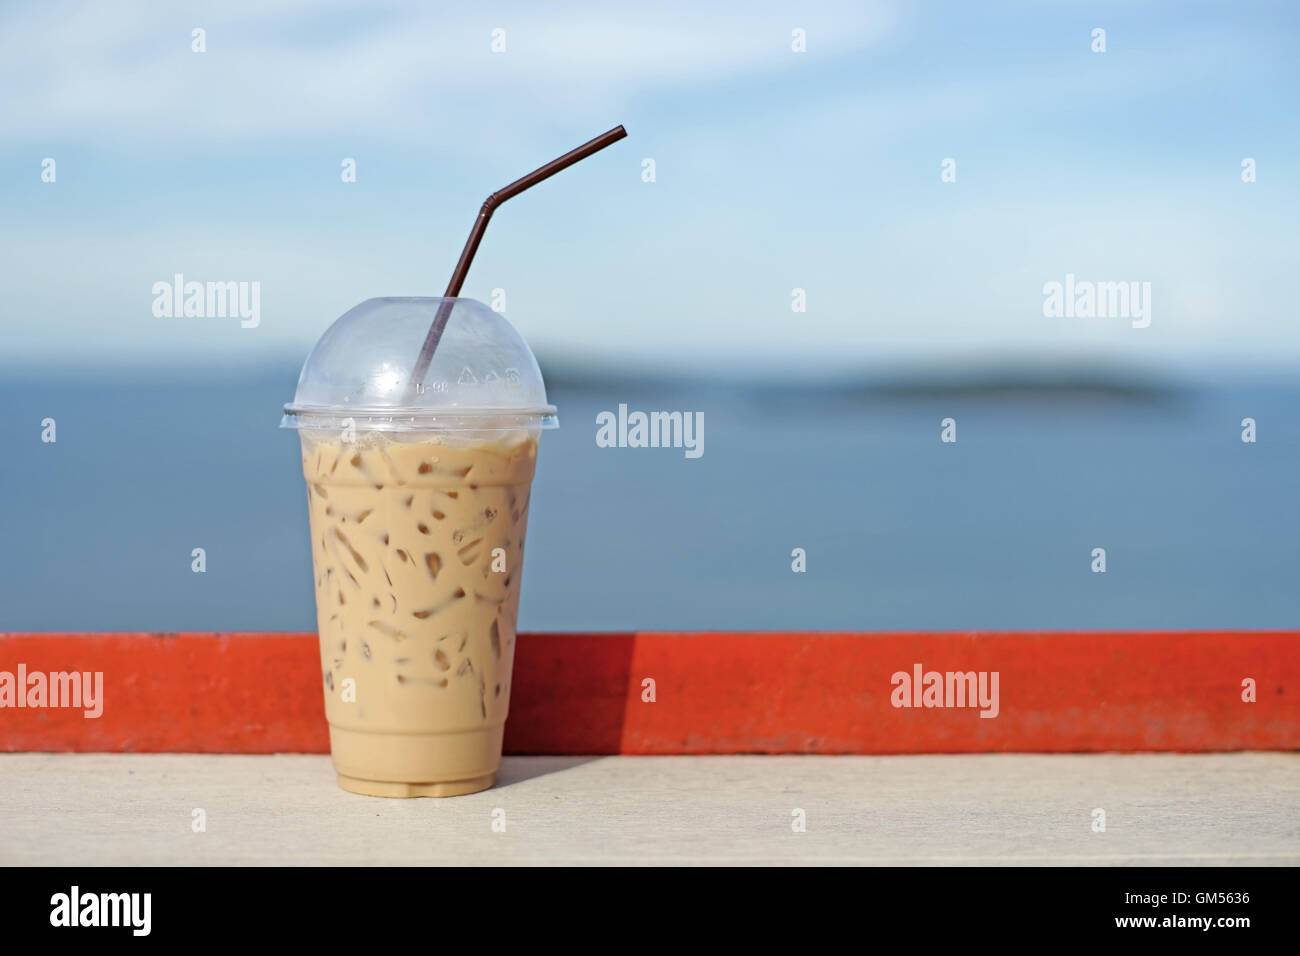 https://c8.alamy.com/comp/GM5636/ice-coffee-in-takeaway-cup-on-wooden-table-GM5636.jpg